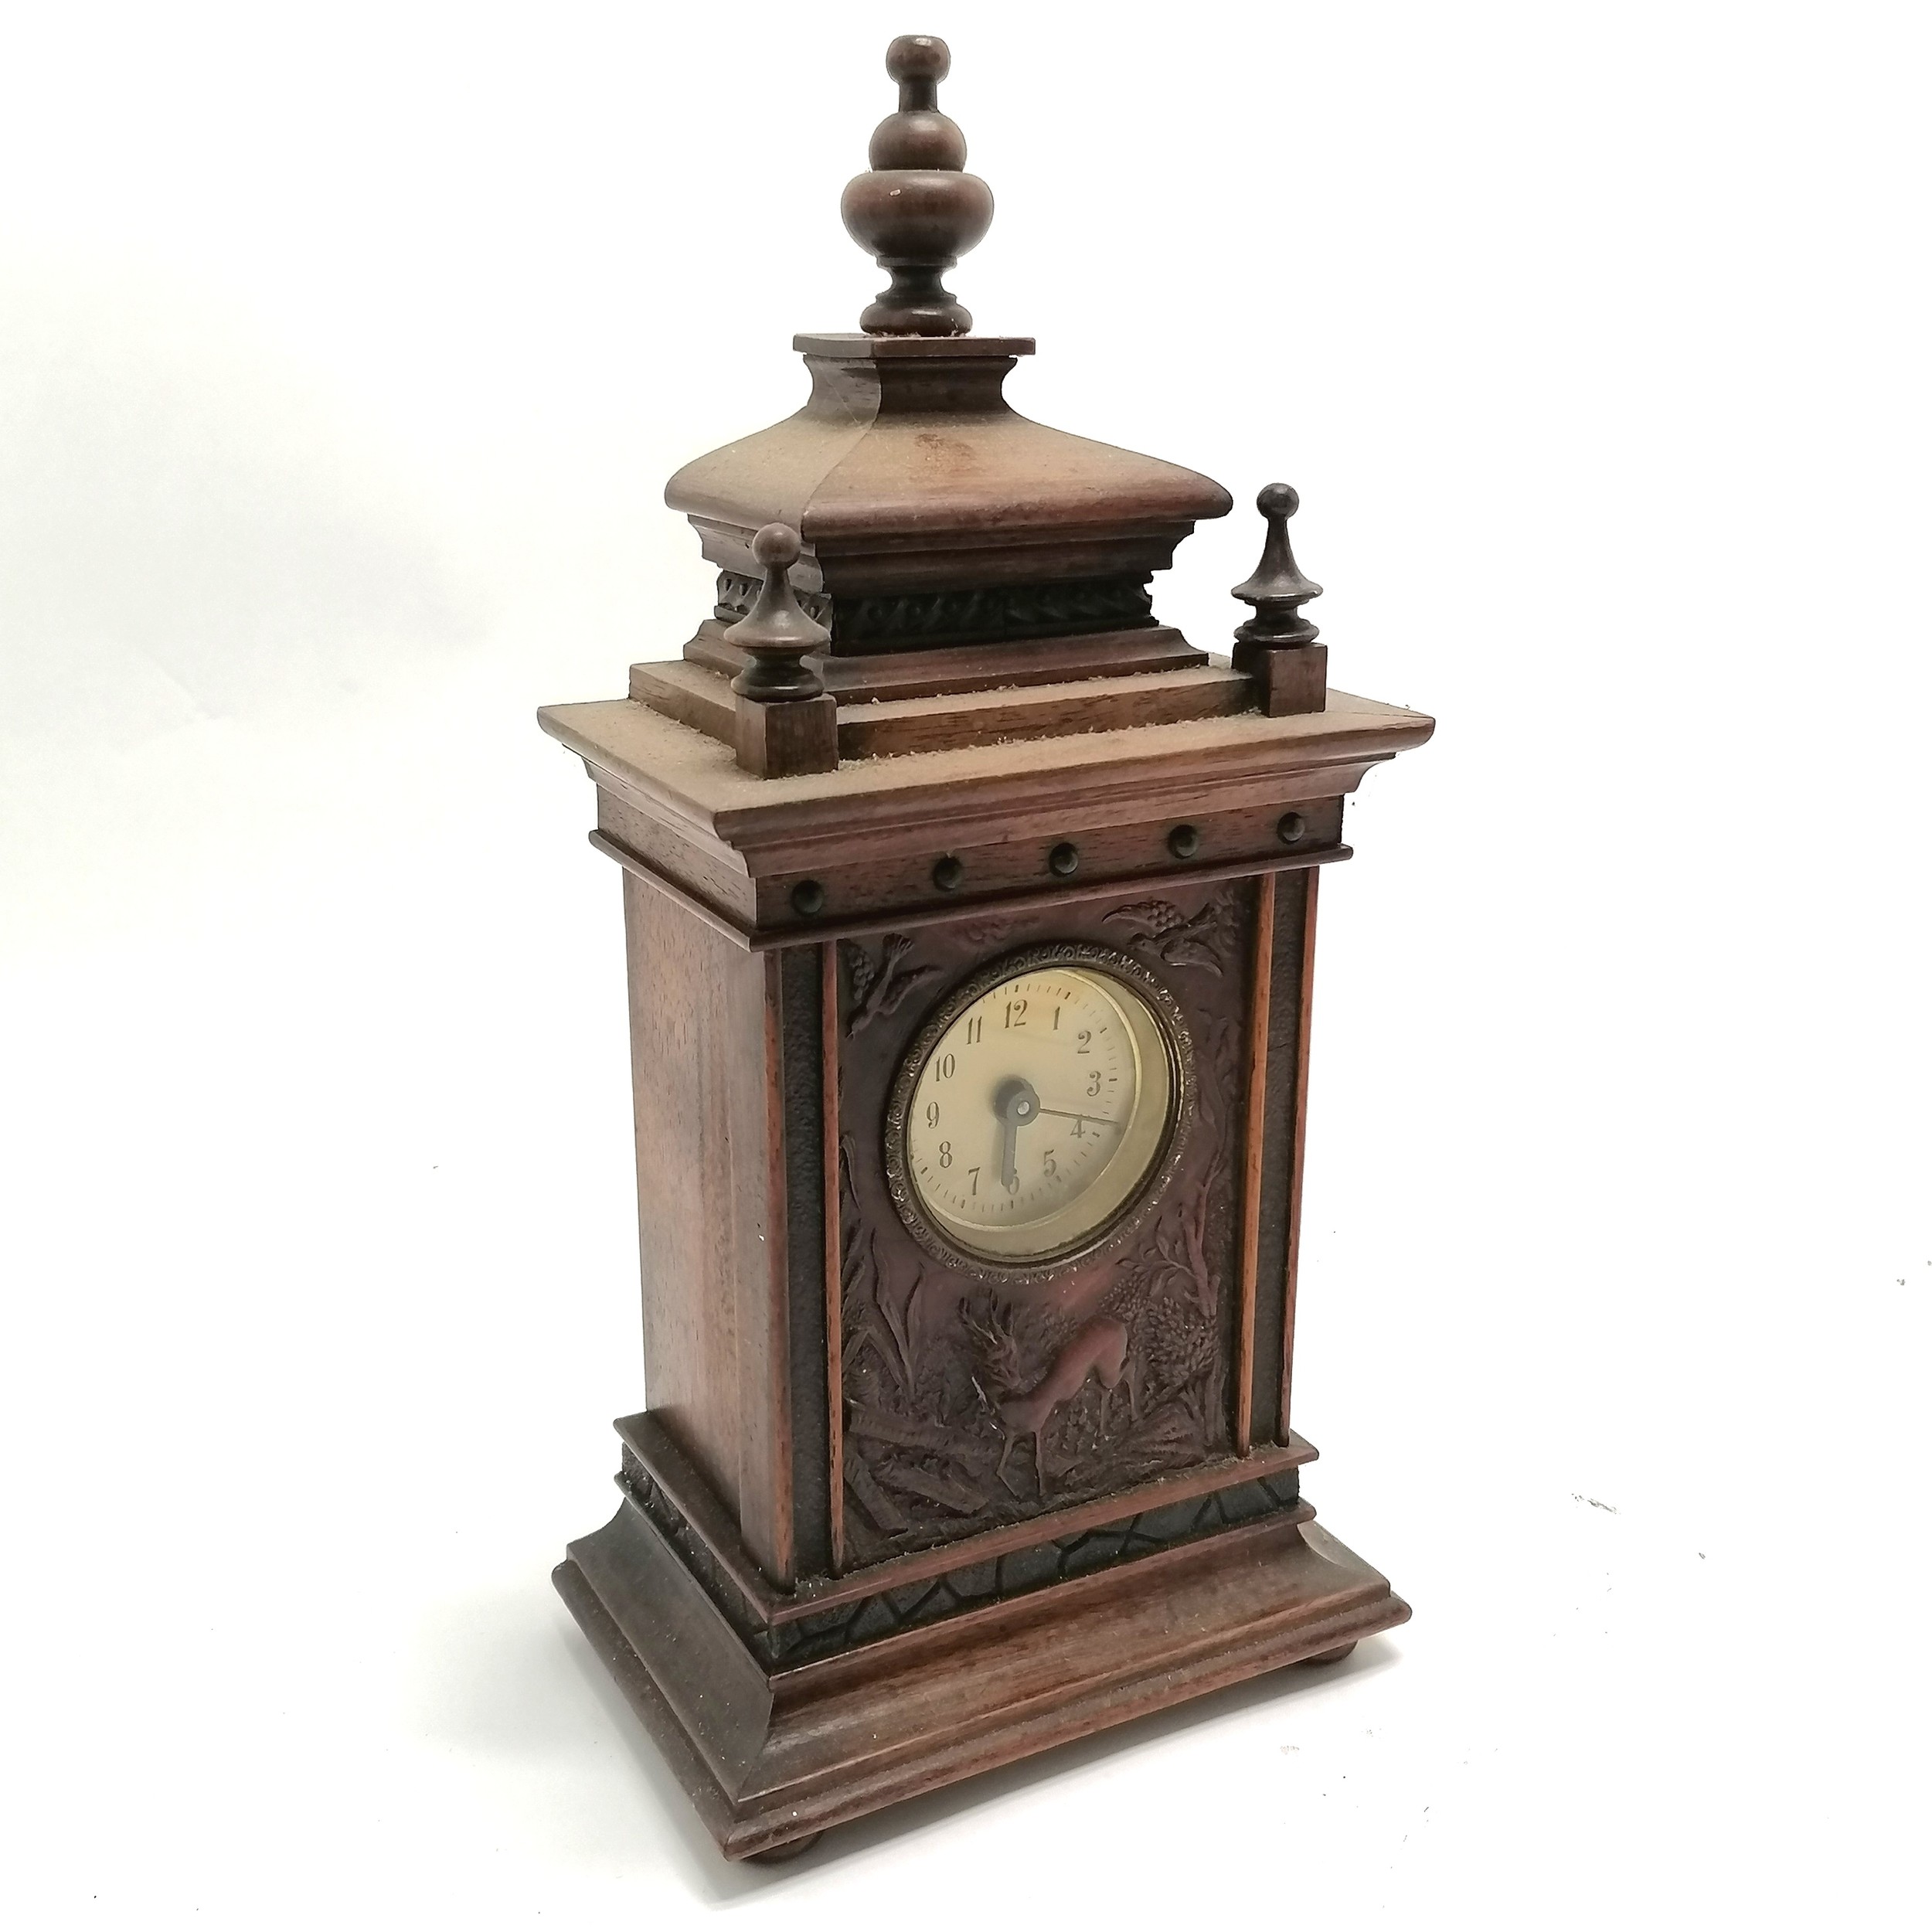 Black forest hand carved wooden clock with front panel decorated with deer & birds - 29cm high x - Image 3 of 4